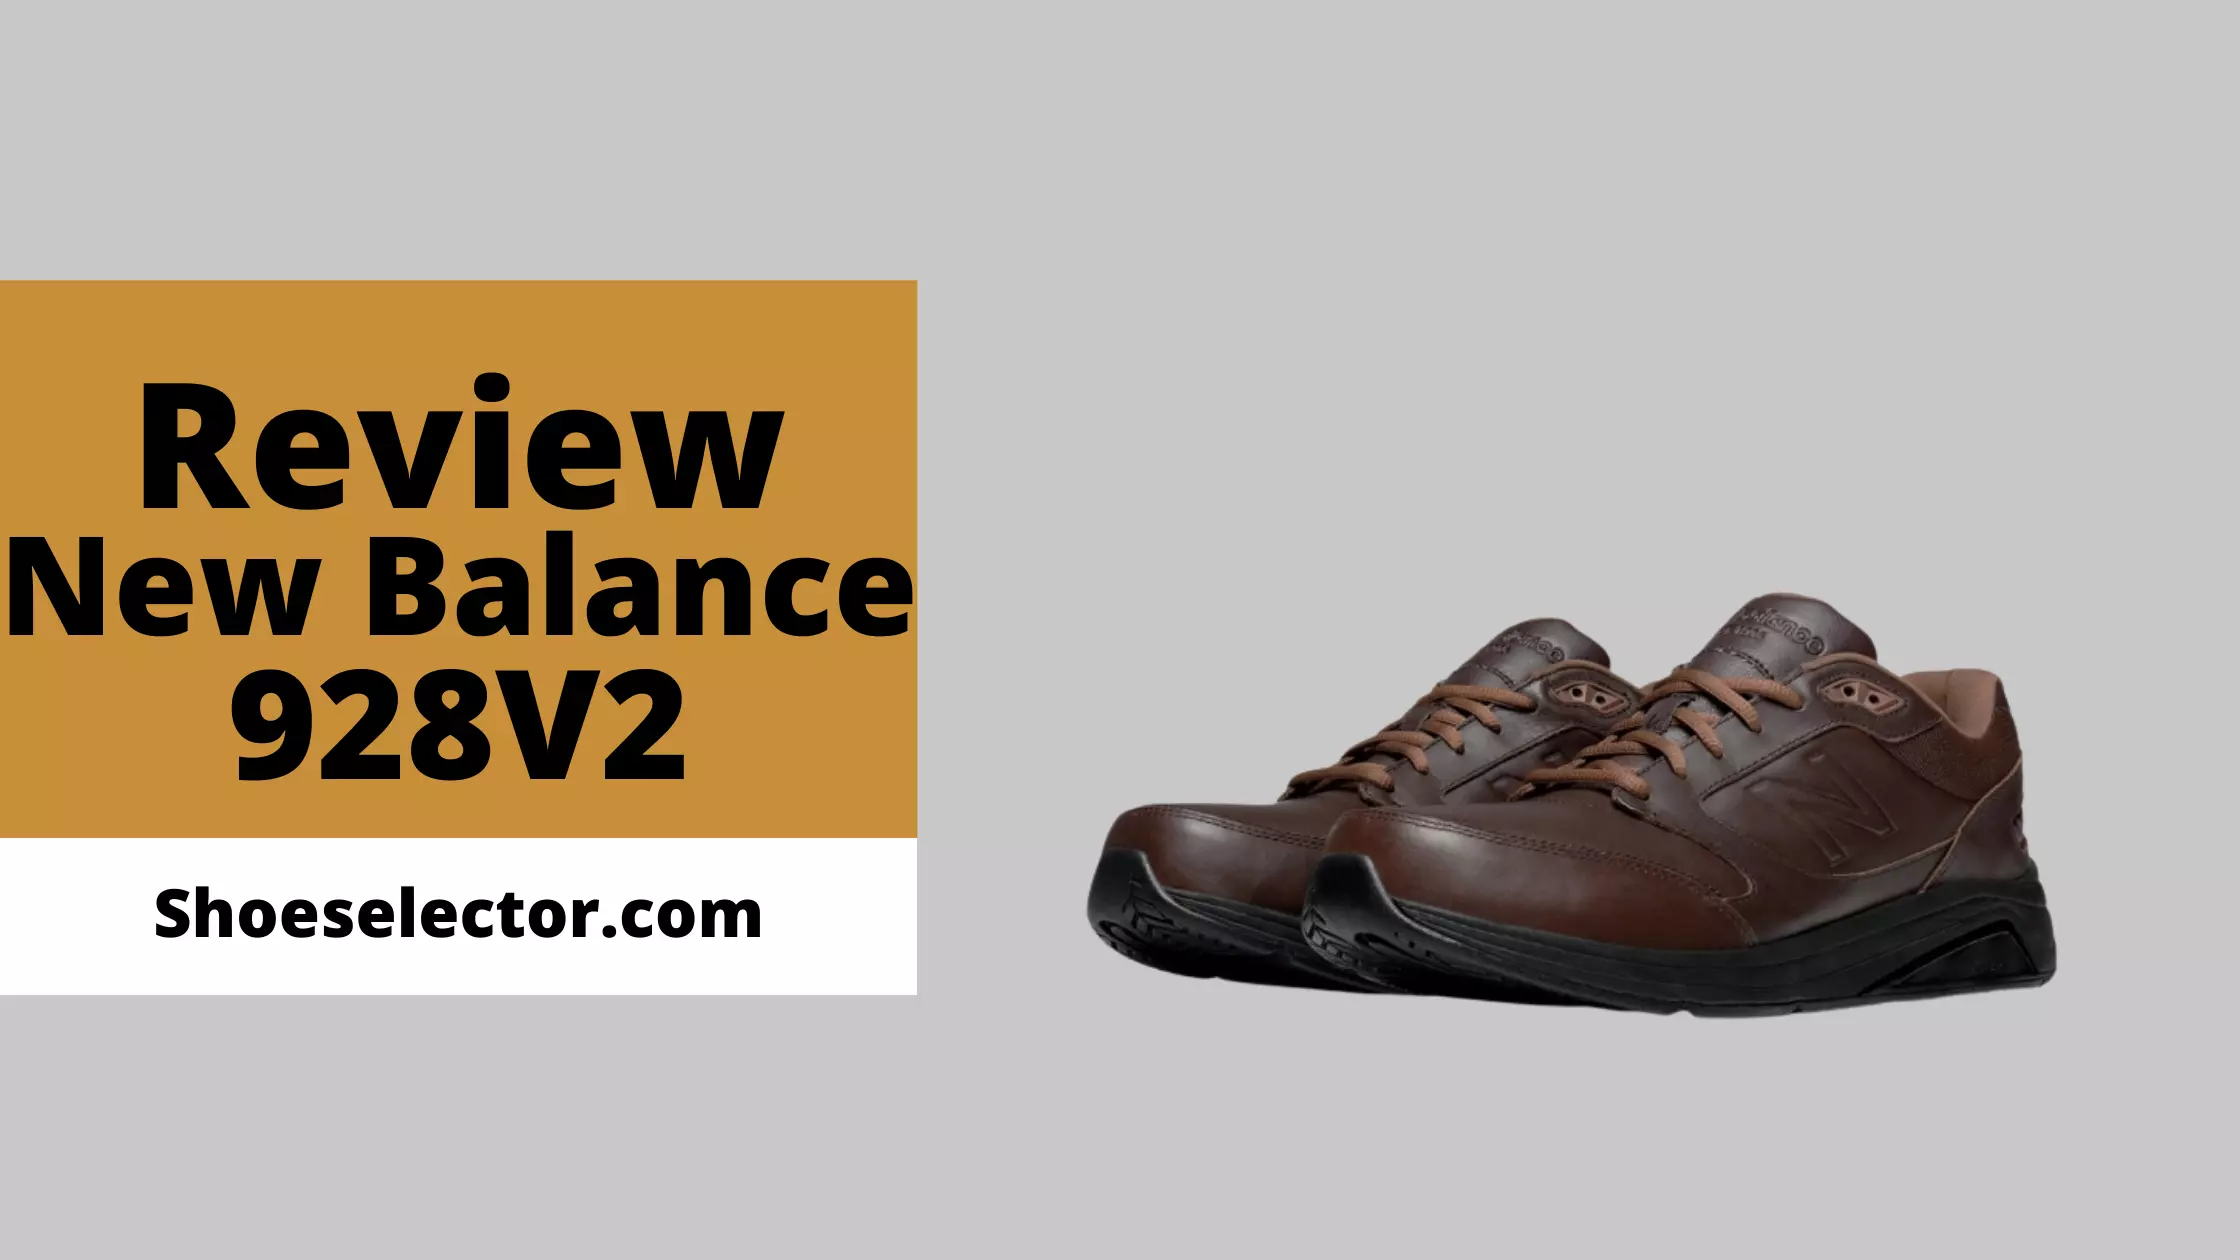 New Balance 928v2 Review - Top Reviewed